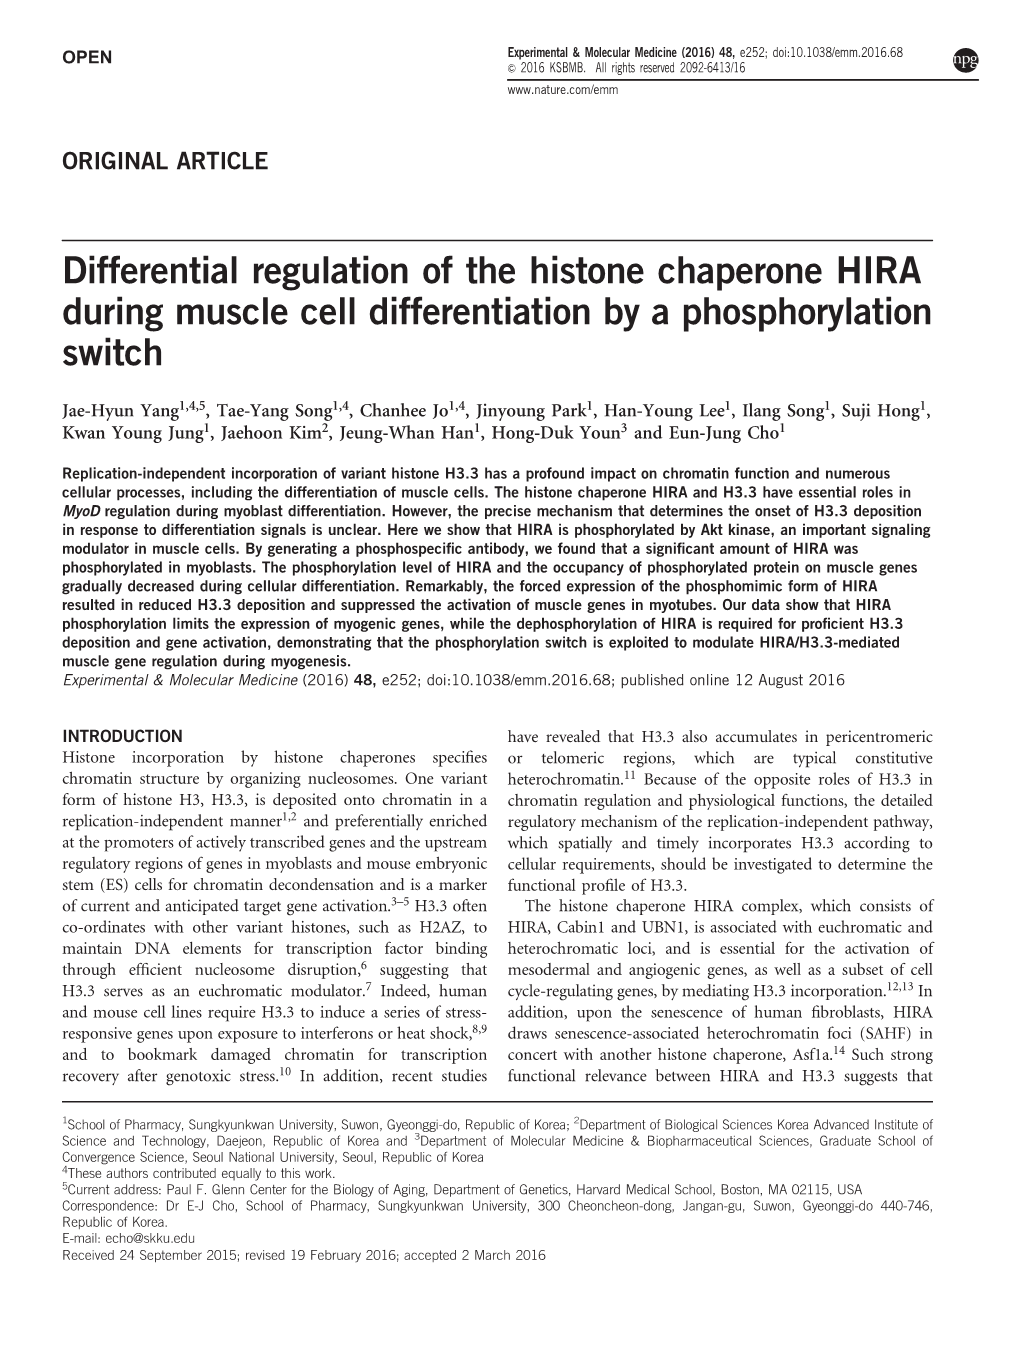 Differential Regulation of the Histone Chaperone HIRA During Muscle Cell Differentiation by a Phosphorylation Switch